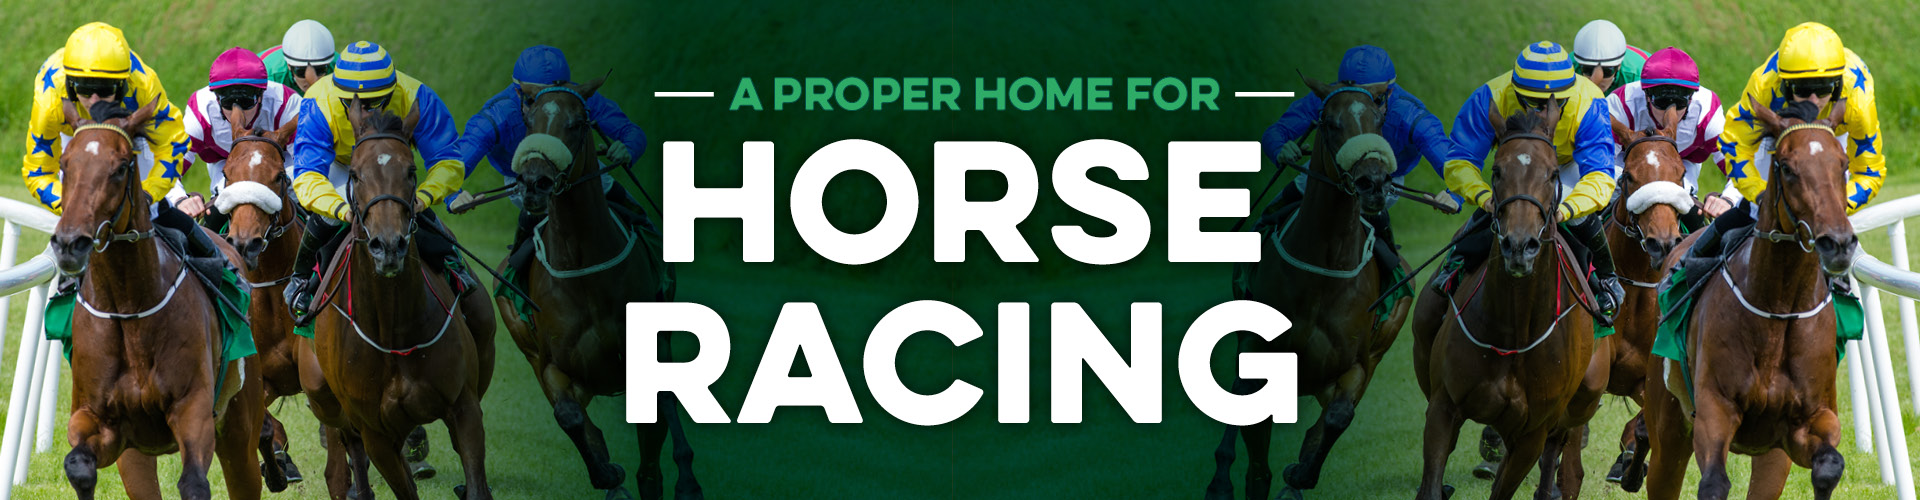 Watch horse racing live at The English Lounge pub